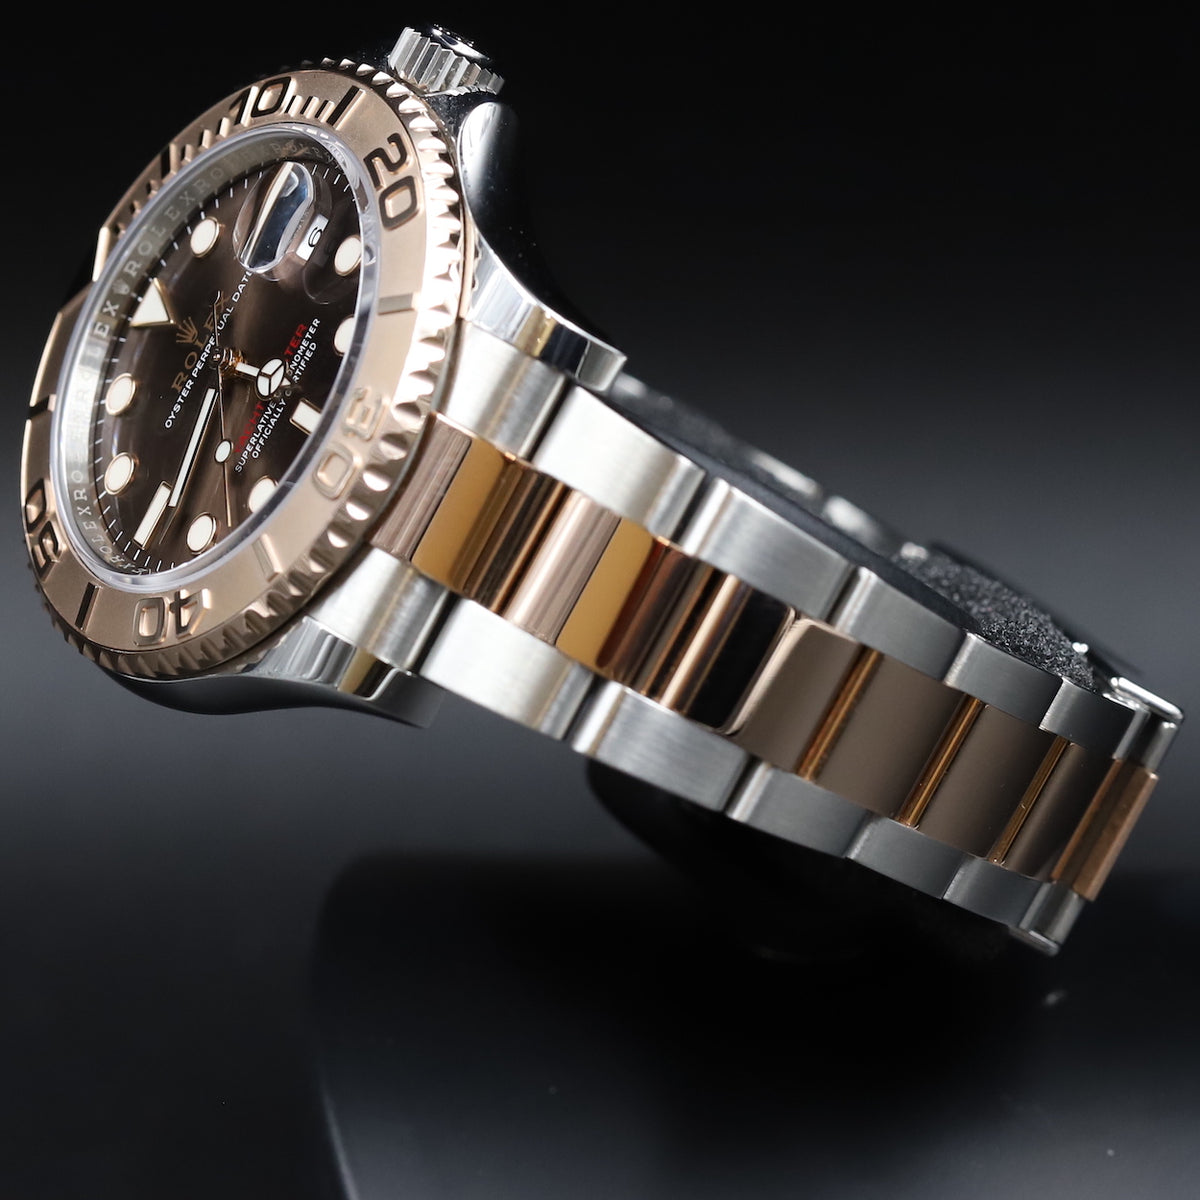 Rolex<br>116621 Yacht-Master 40 SS/RG Chocolate Dial